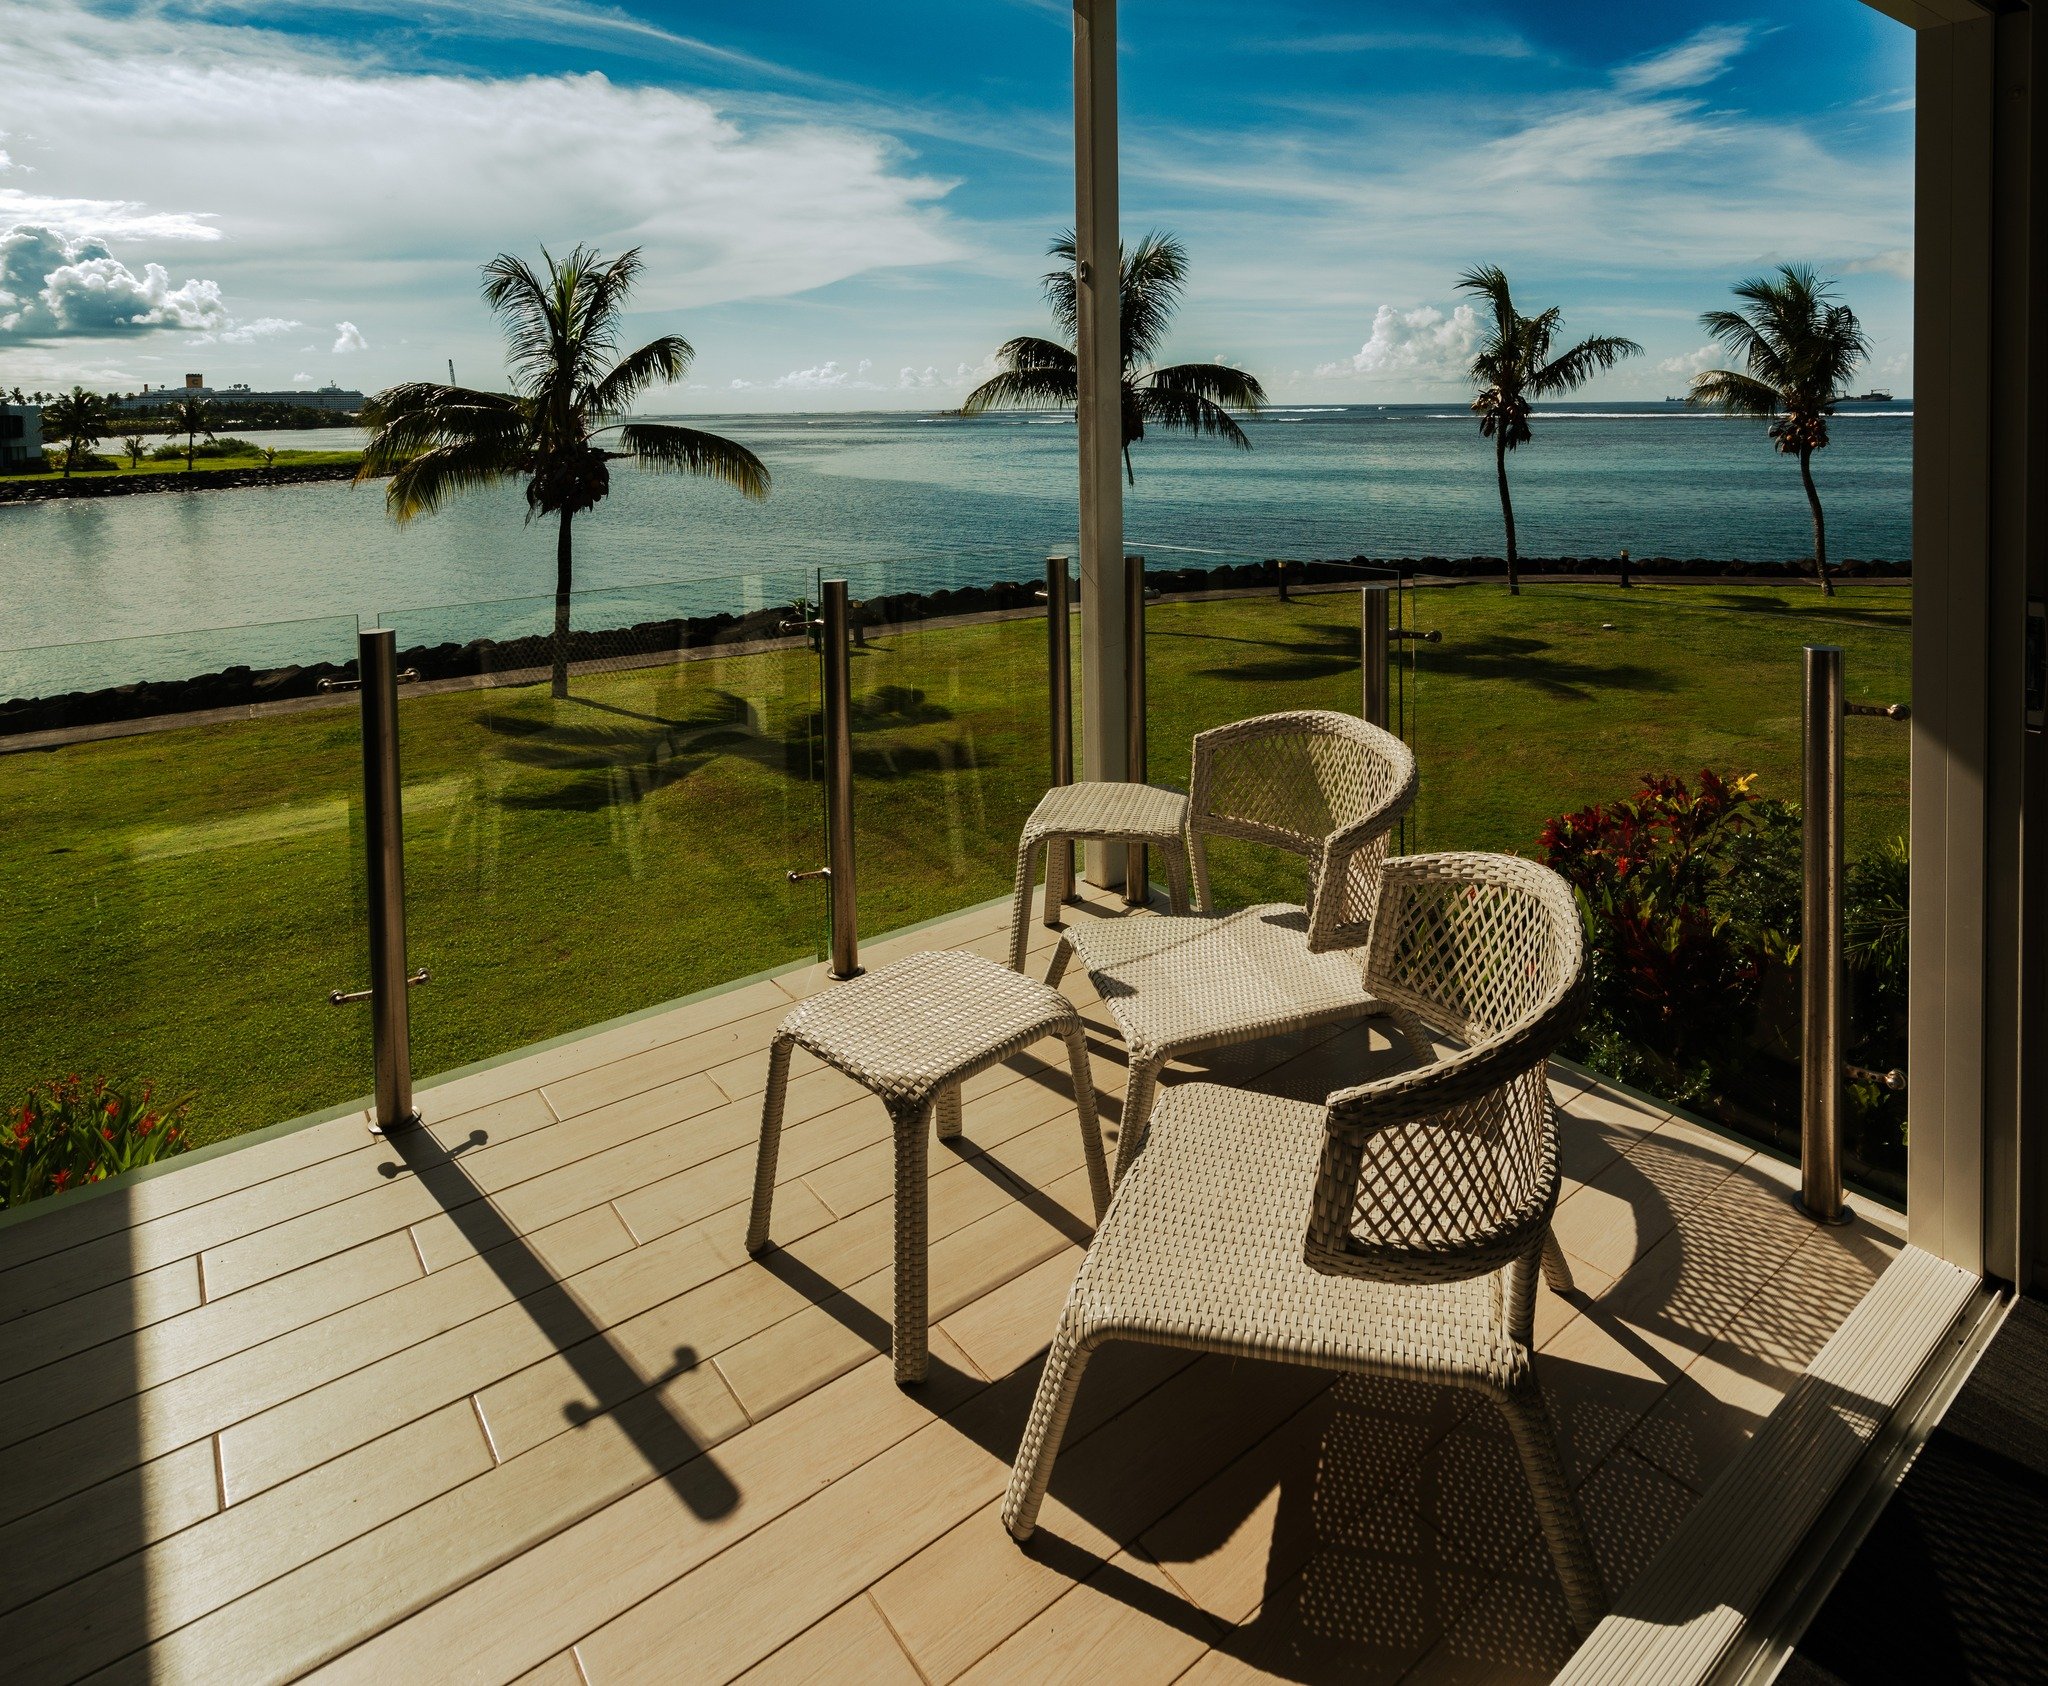 Waking up to ocean views at Taumeasina Island Resort: the ultimate island morning routine. 🌴☀️